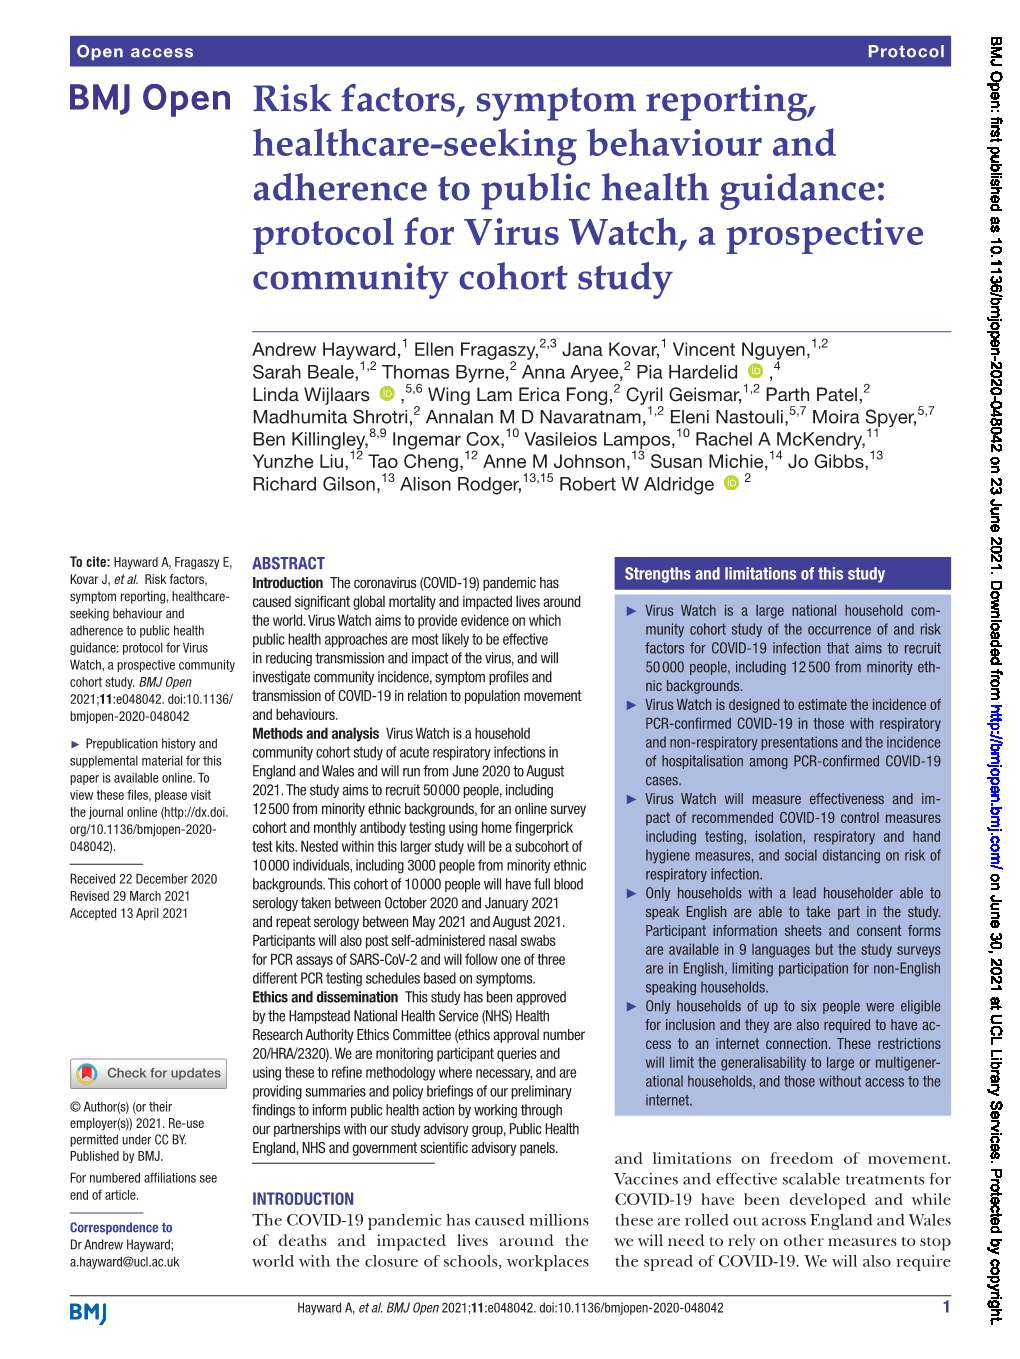 Risk Factors, Symptom Reporting, Healthcare-­Seeking Behaviour and Adherence to Public Health Guidance: Protocol for Virus Watch, a Prospective Community Cohort Study